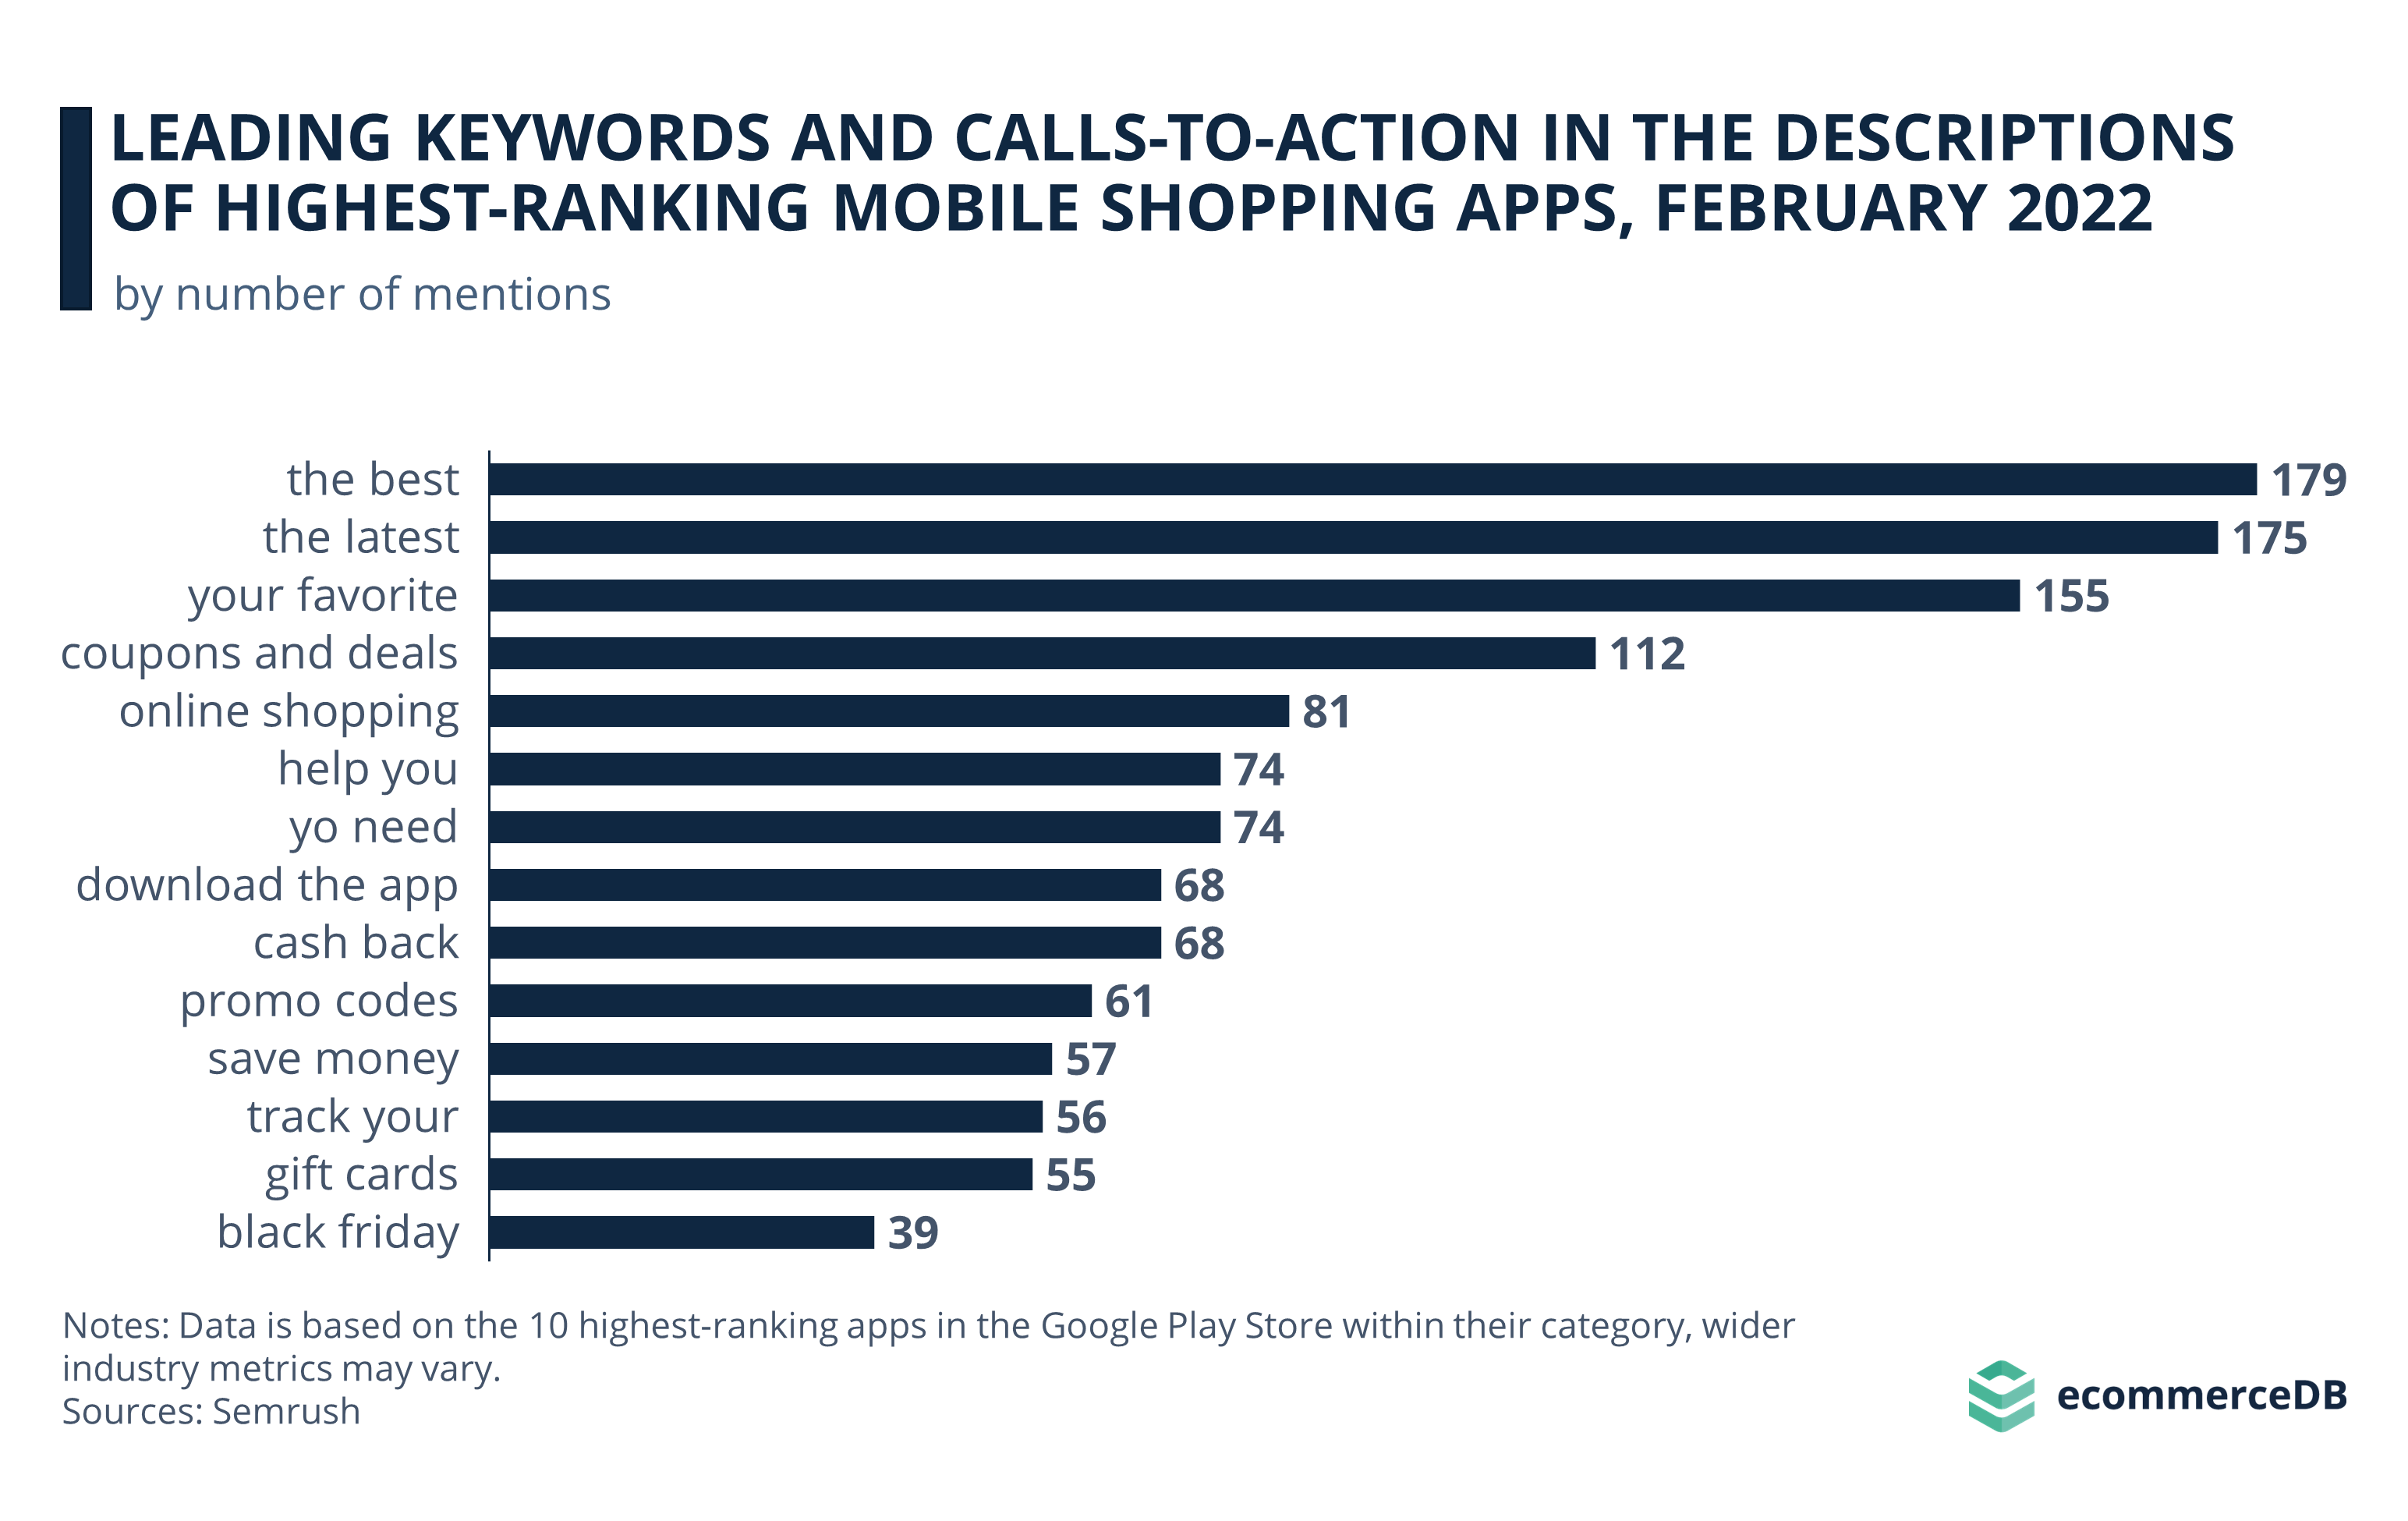 Leading Keywords and Calls-to-Action in the Descriptions of Highest-Ranking Mobile Shopping Apps, February 2022